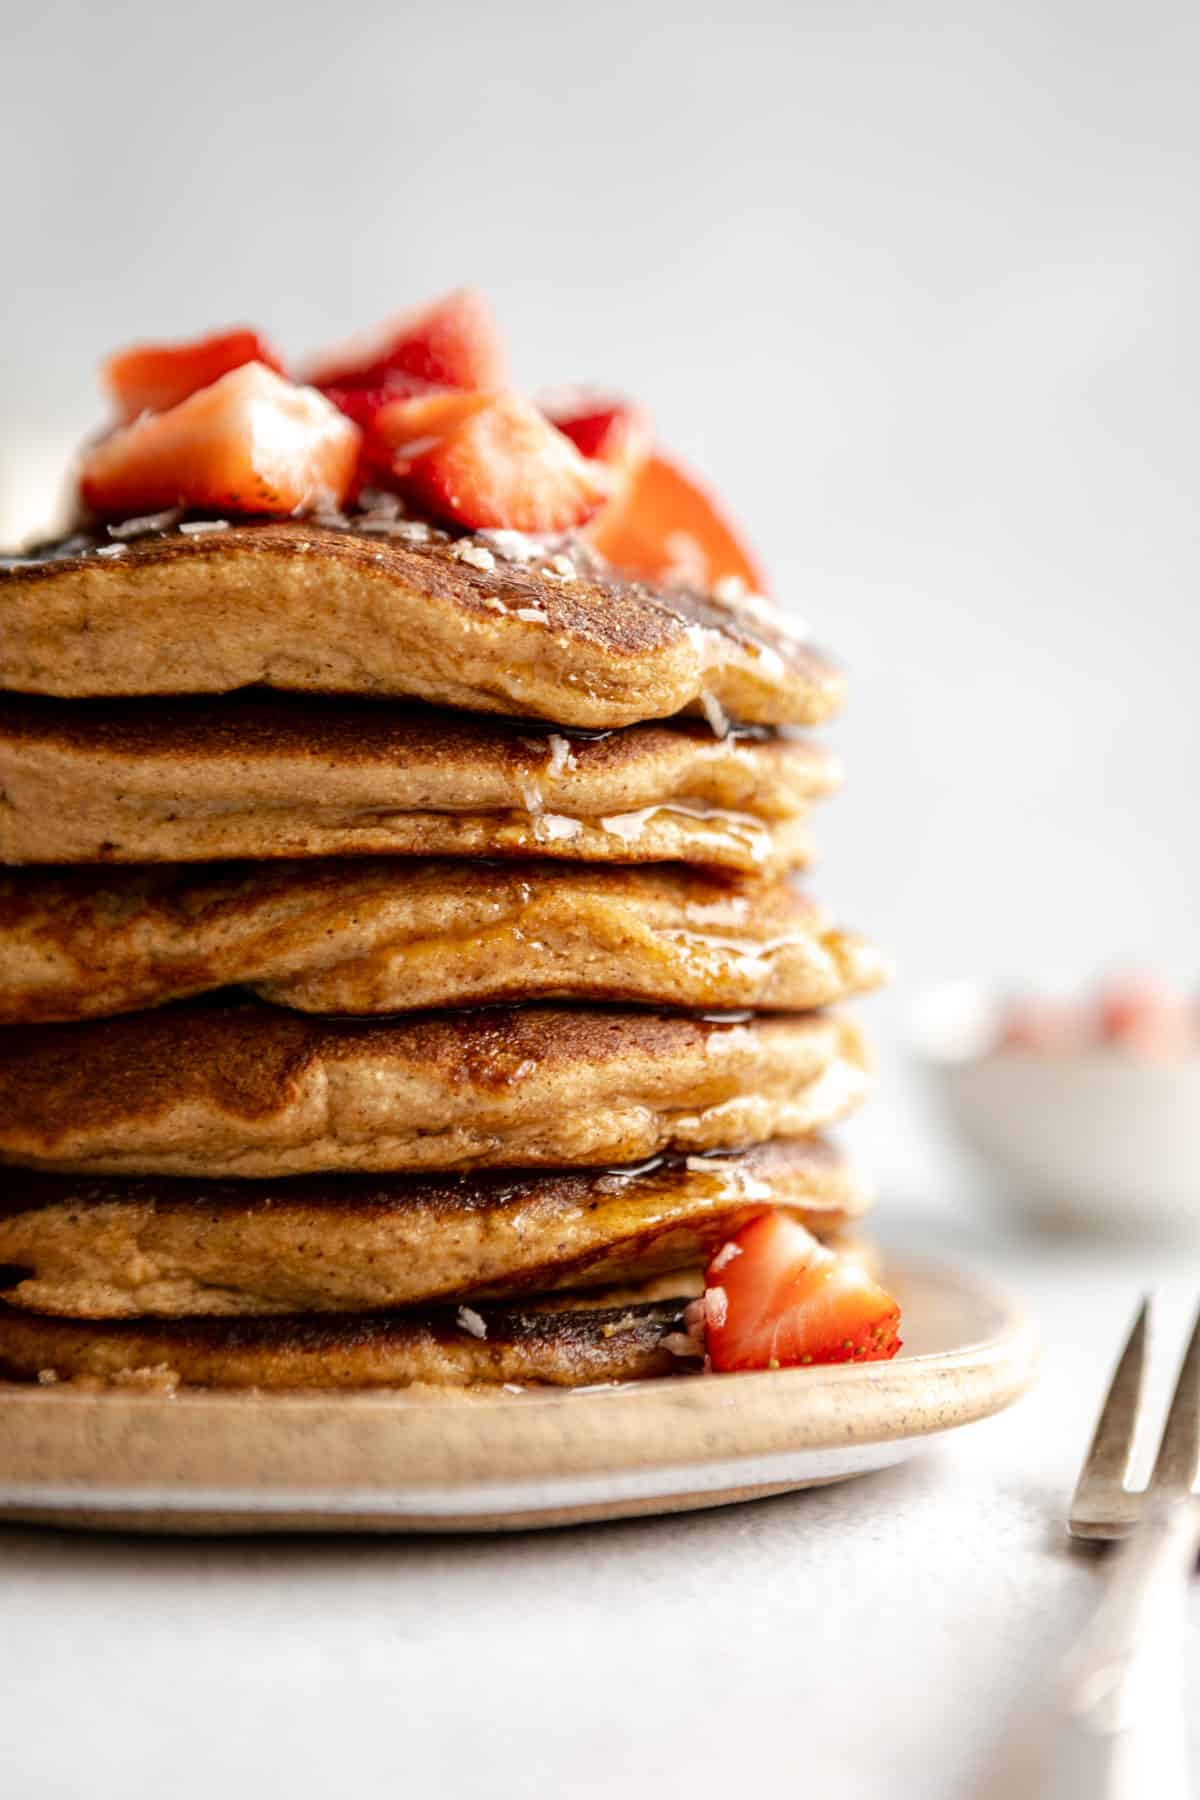 coconut flour pancakes with strawberries on top